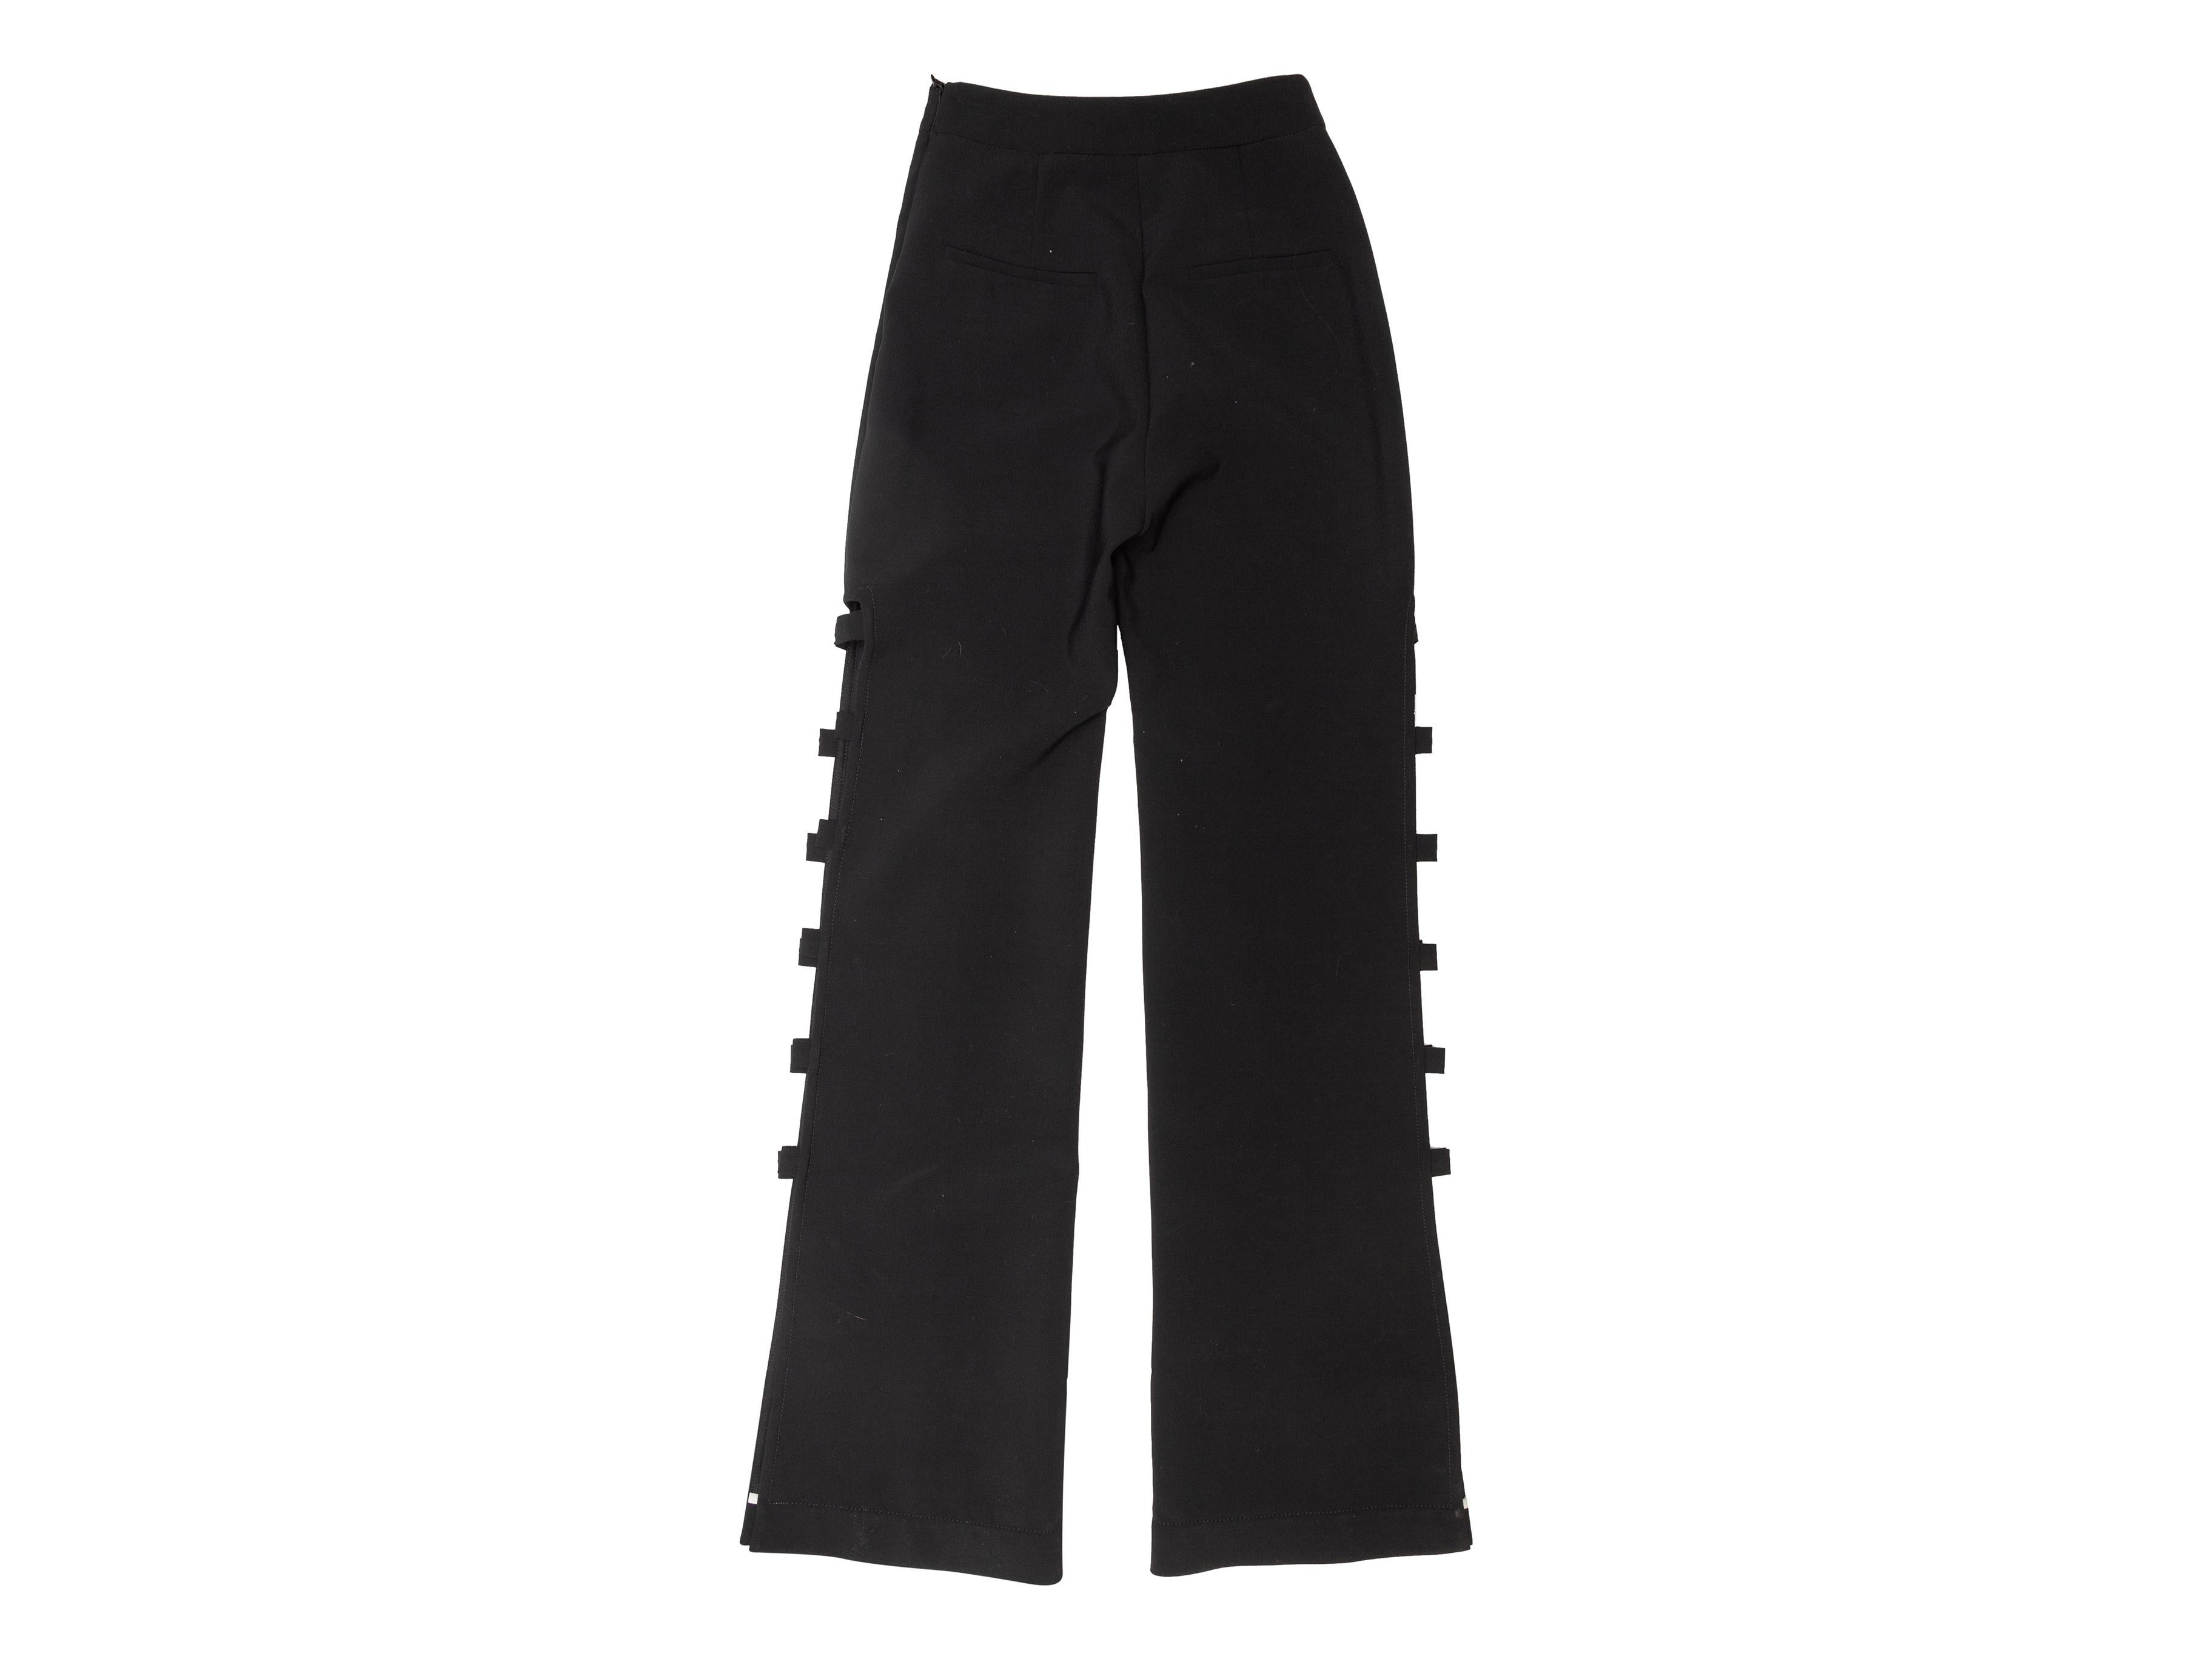 Product details: Black high-rise trousers by Ellery. Cutouts at outer sides of legs. Zip closure at side. 24